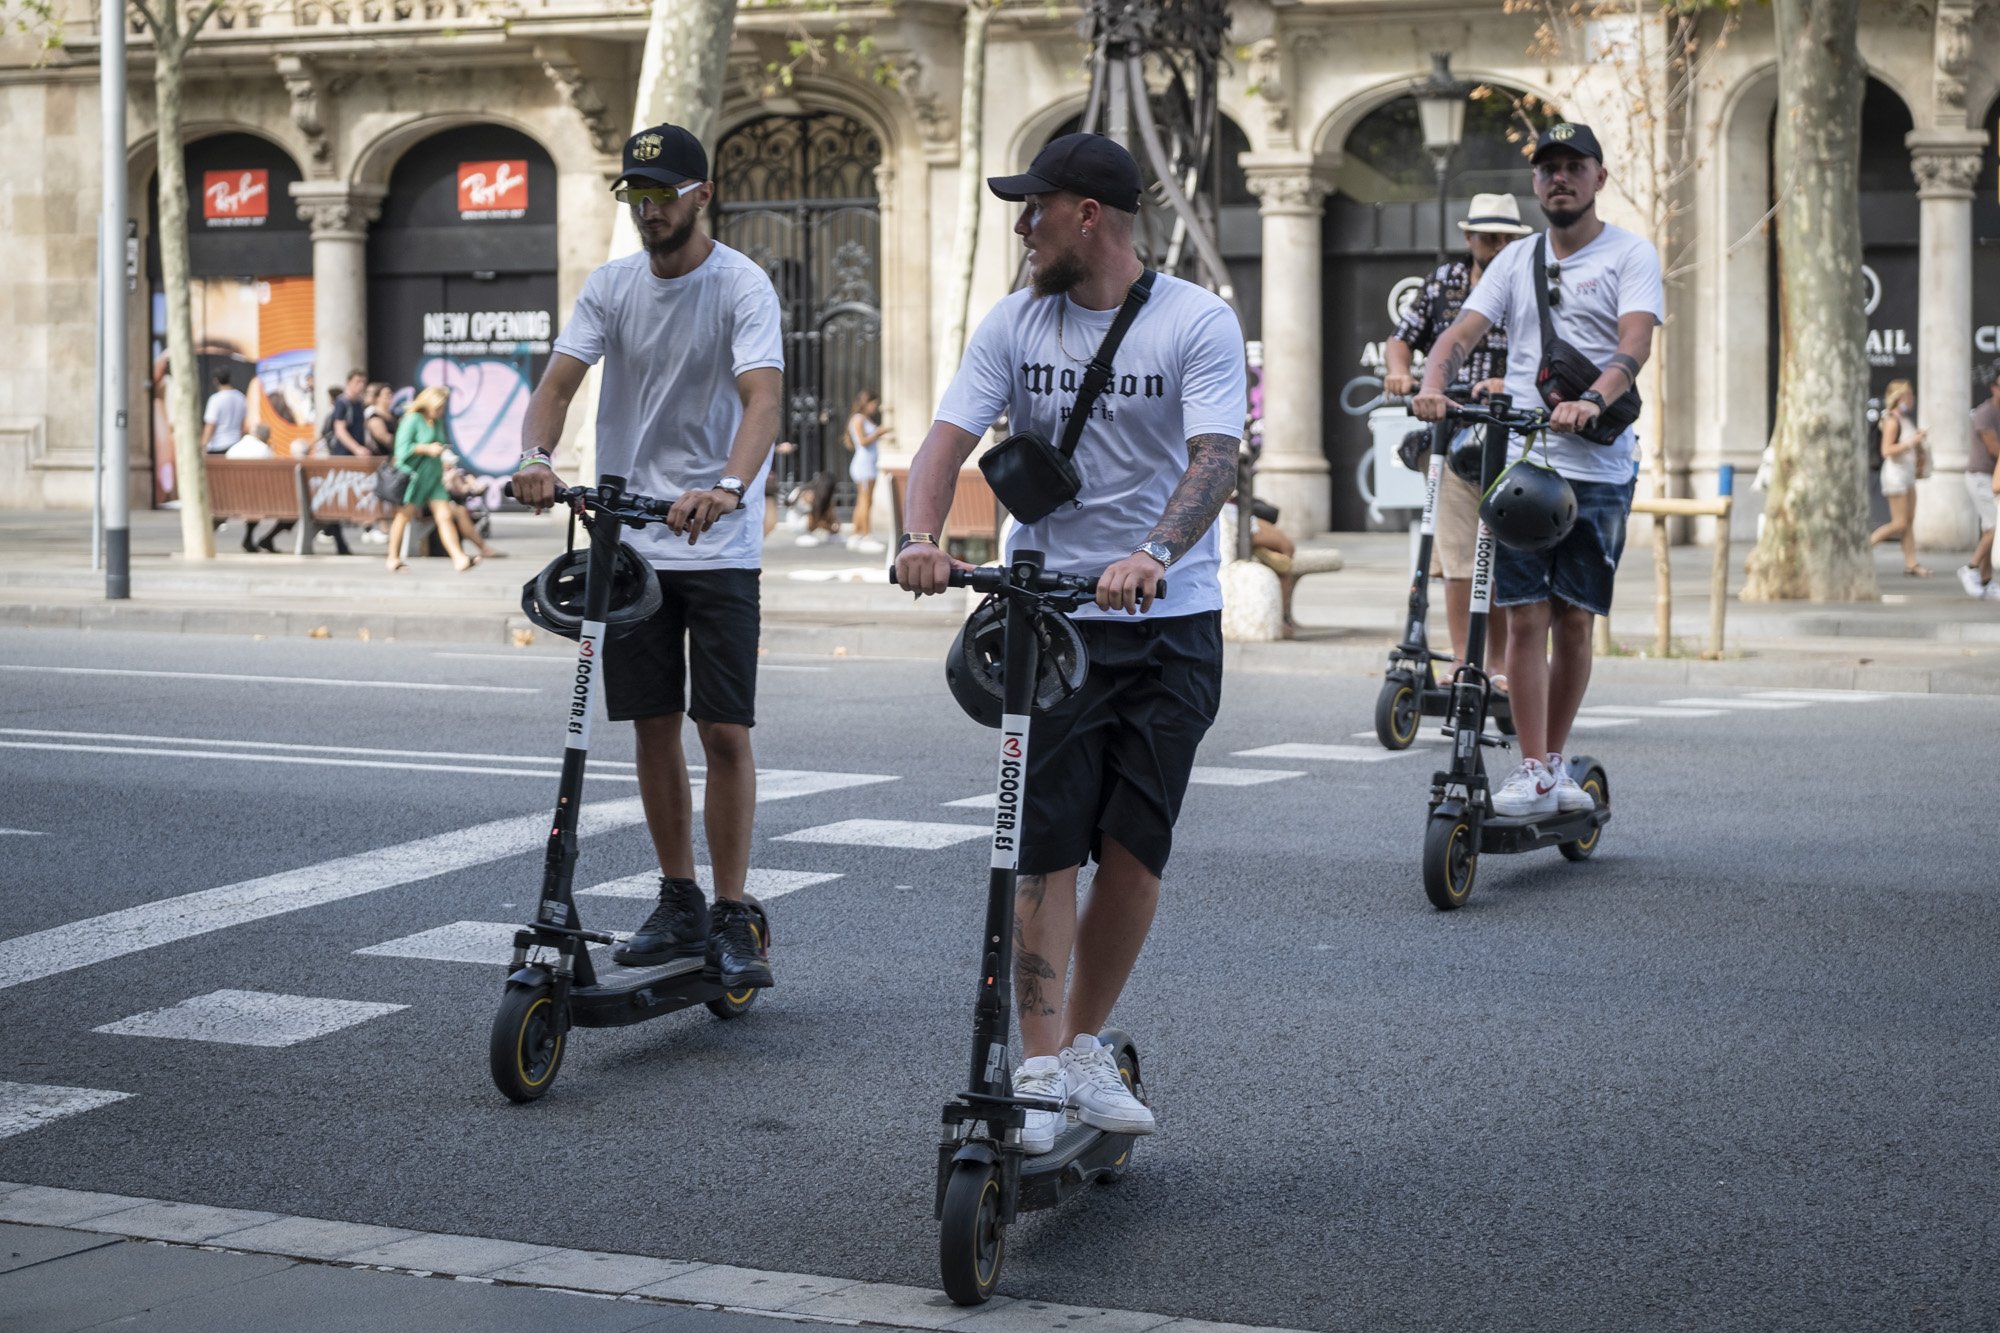 Electric scooters facing ban from Barcelona public transport after fire in train